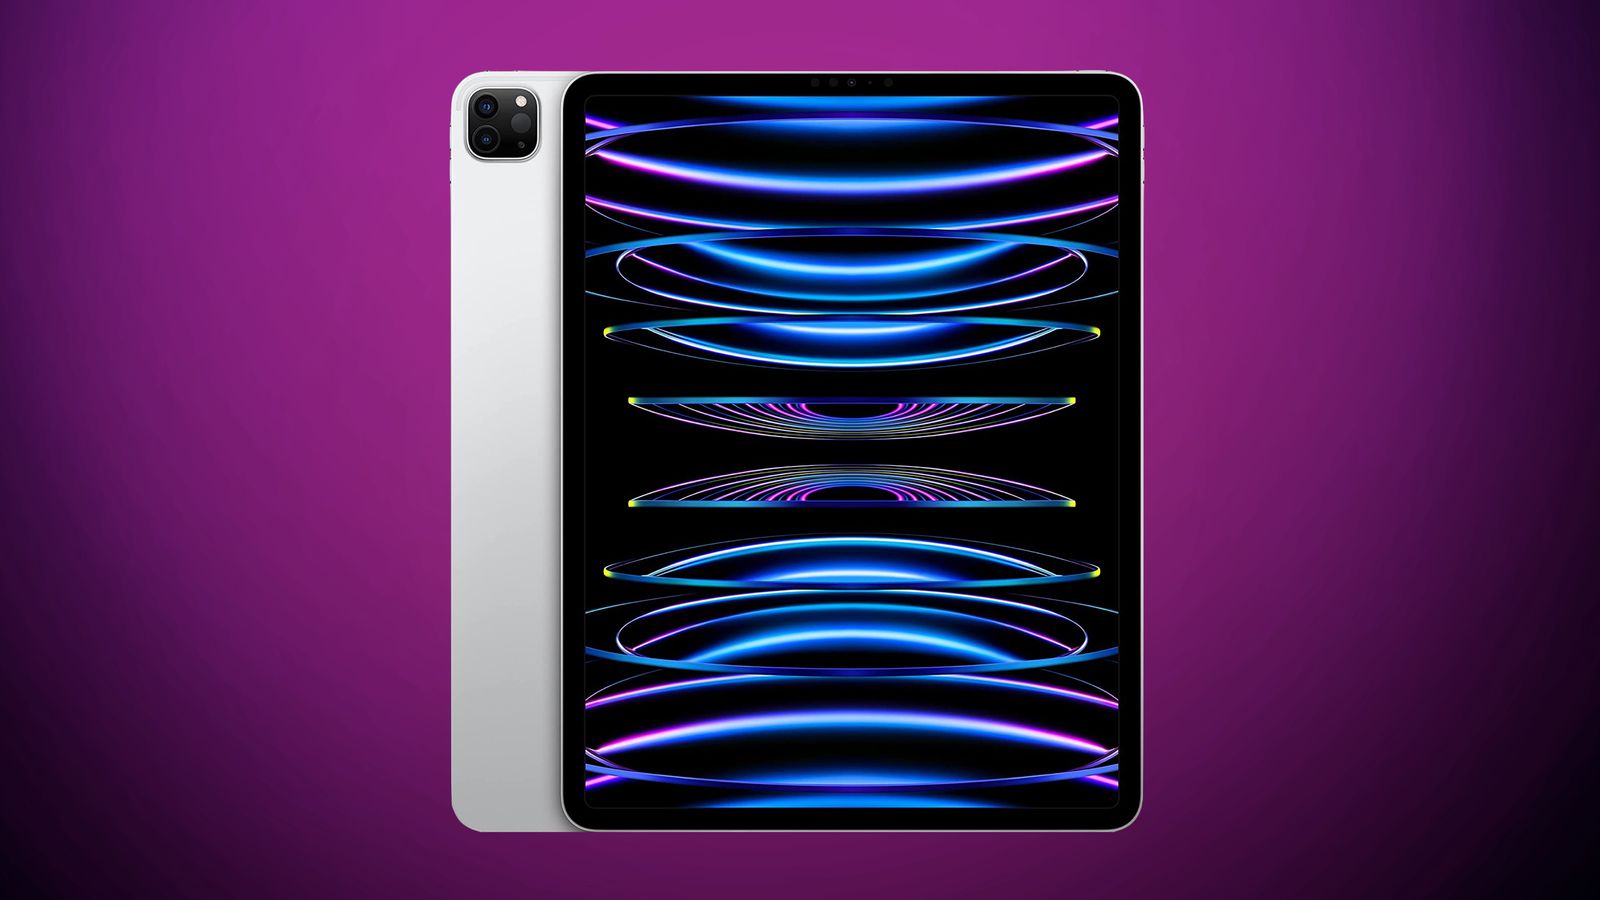 14-Inch iPad Pro With Mini-LED Display Rumored to Launch in Early 2023 -  MacRumors